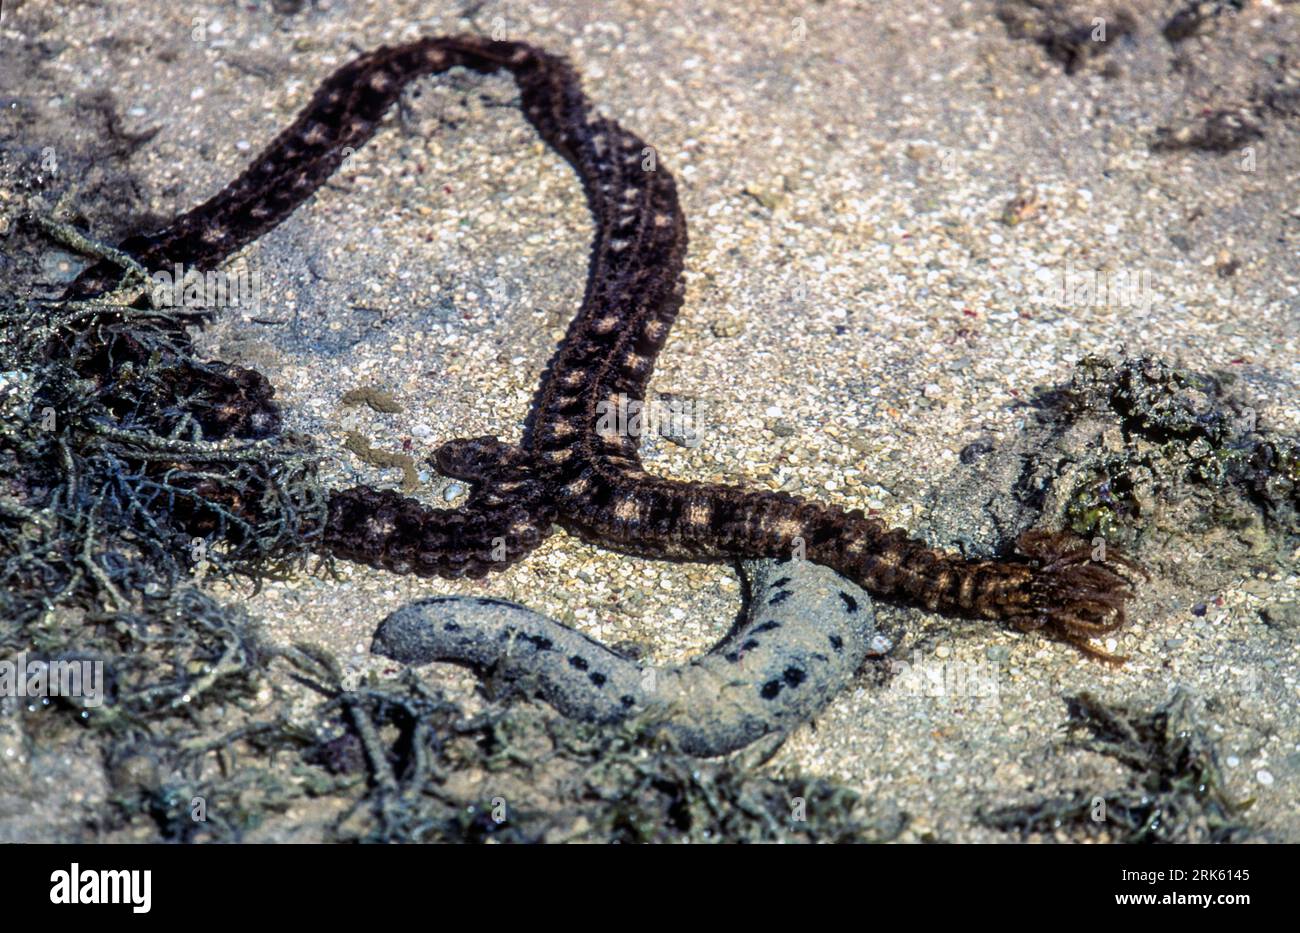 Snake sea cucumber (Synapta maculata) from a sandy reef flat in Fiji. Also seen is the black sea cucumber (Holothuria atra). Stock Photo